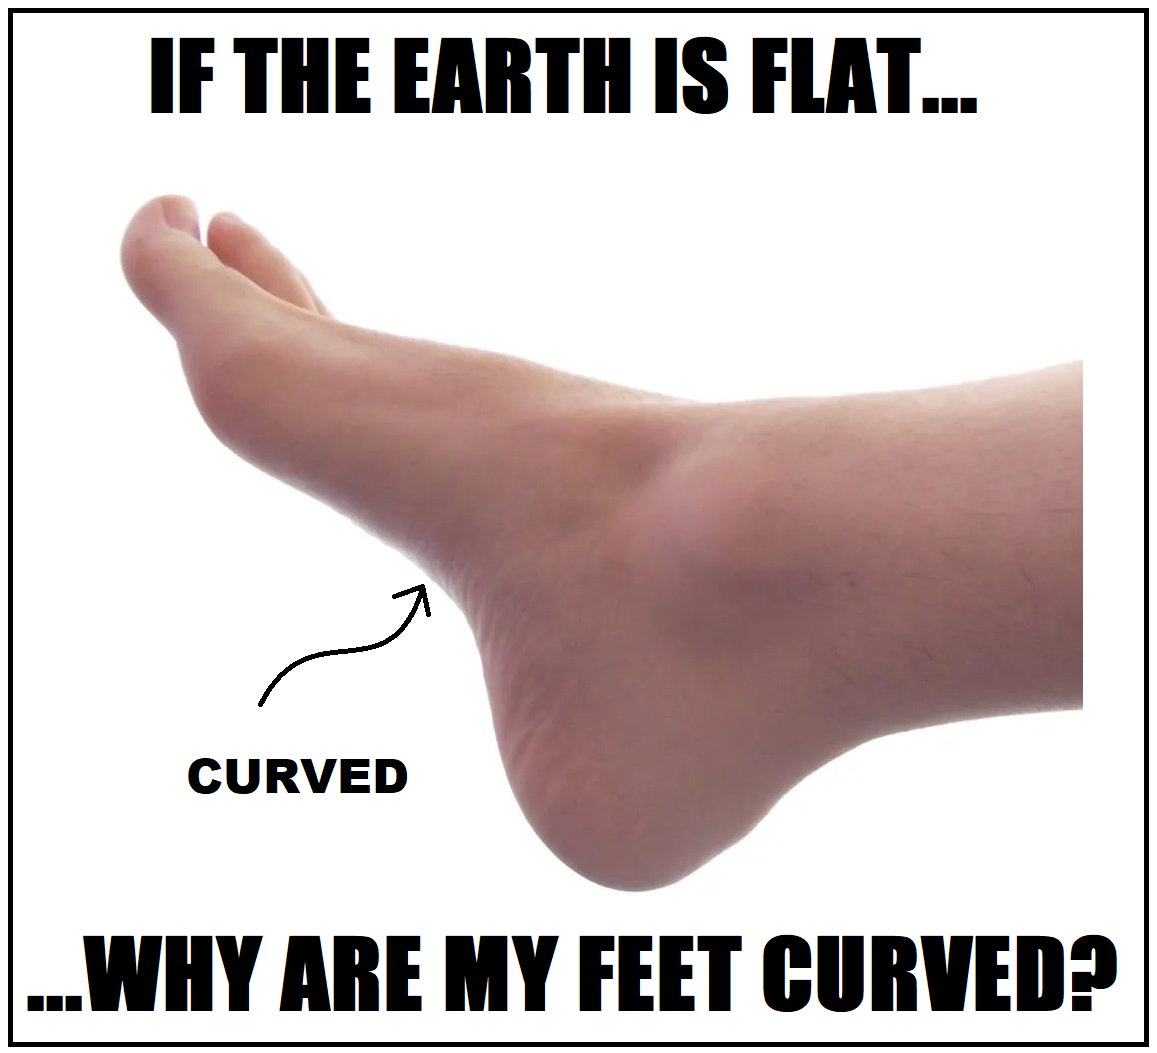 Checkmate, flat-earthers!